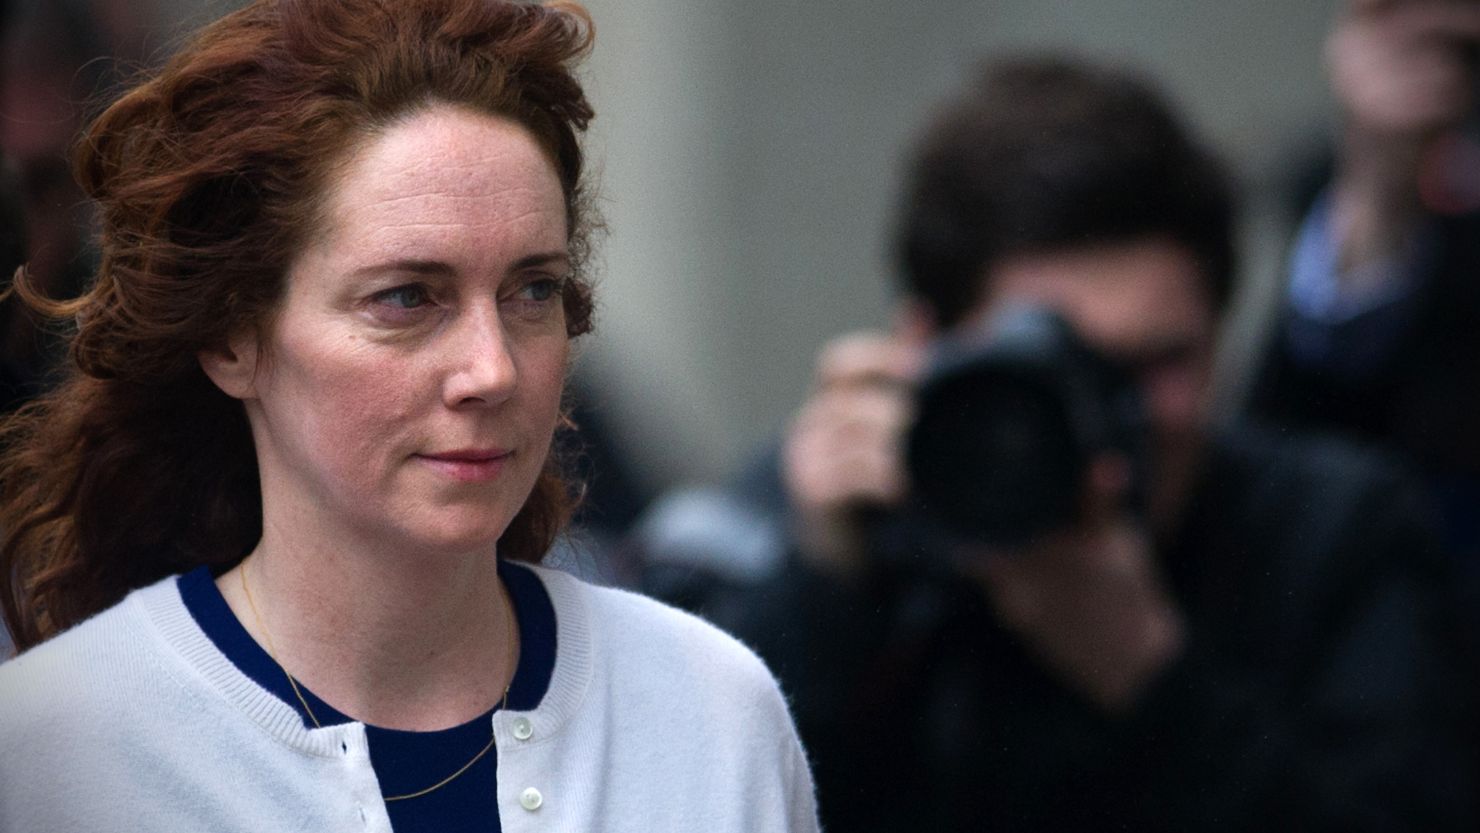 Rebekah Brooks, former News International chief executive justifies the payment of an official, saying the story was of "overwhelming public interest."